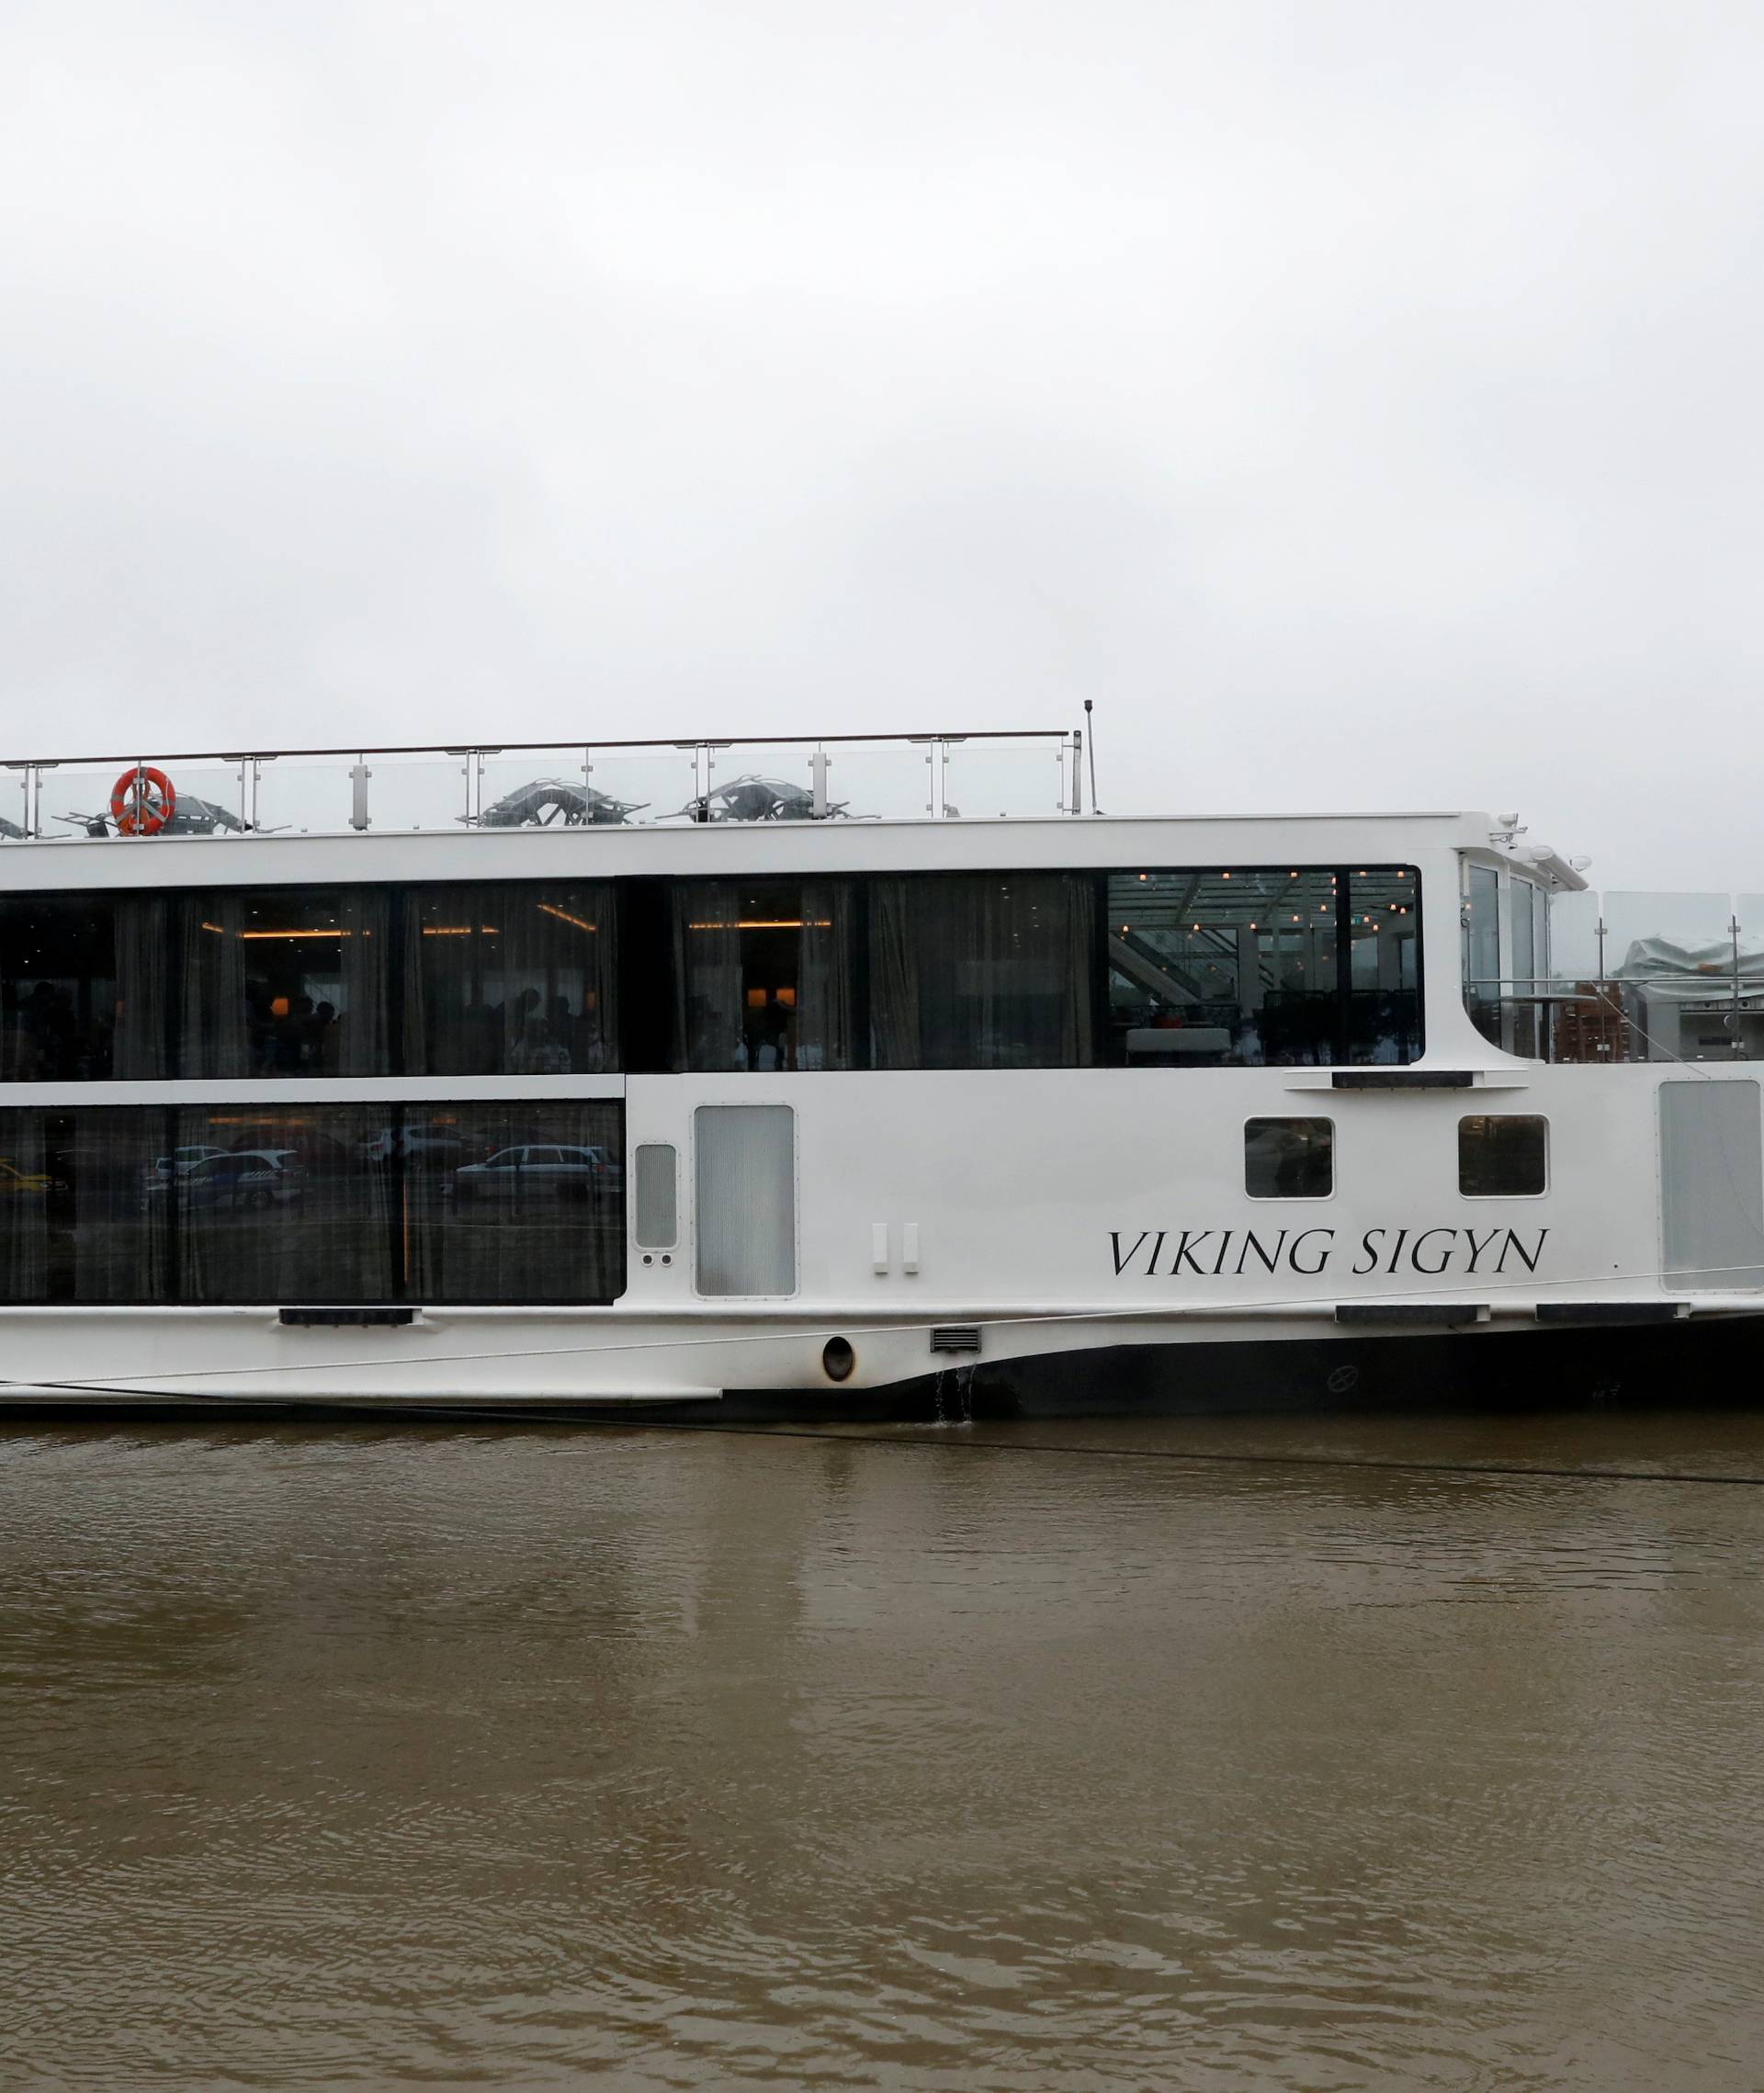 General view shows the tourist vessel Viking Sigyn which was involved in a ship accident that killed several people on the Danube river in Budapest